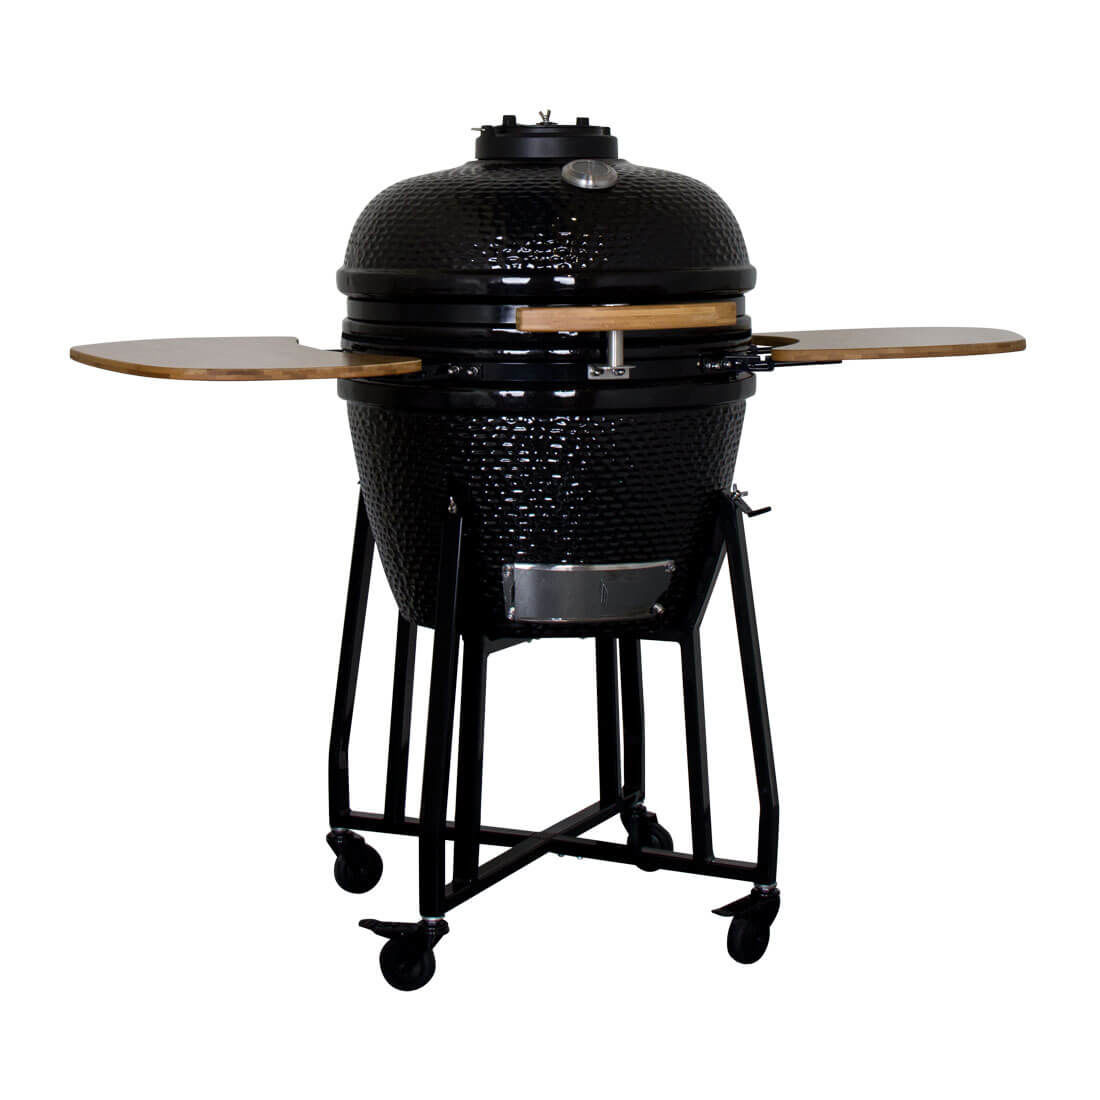 Image of Mr. Grill KG46 Keramik Grill bei nettoshop.ch